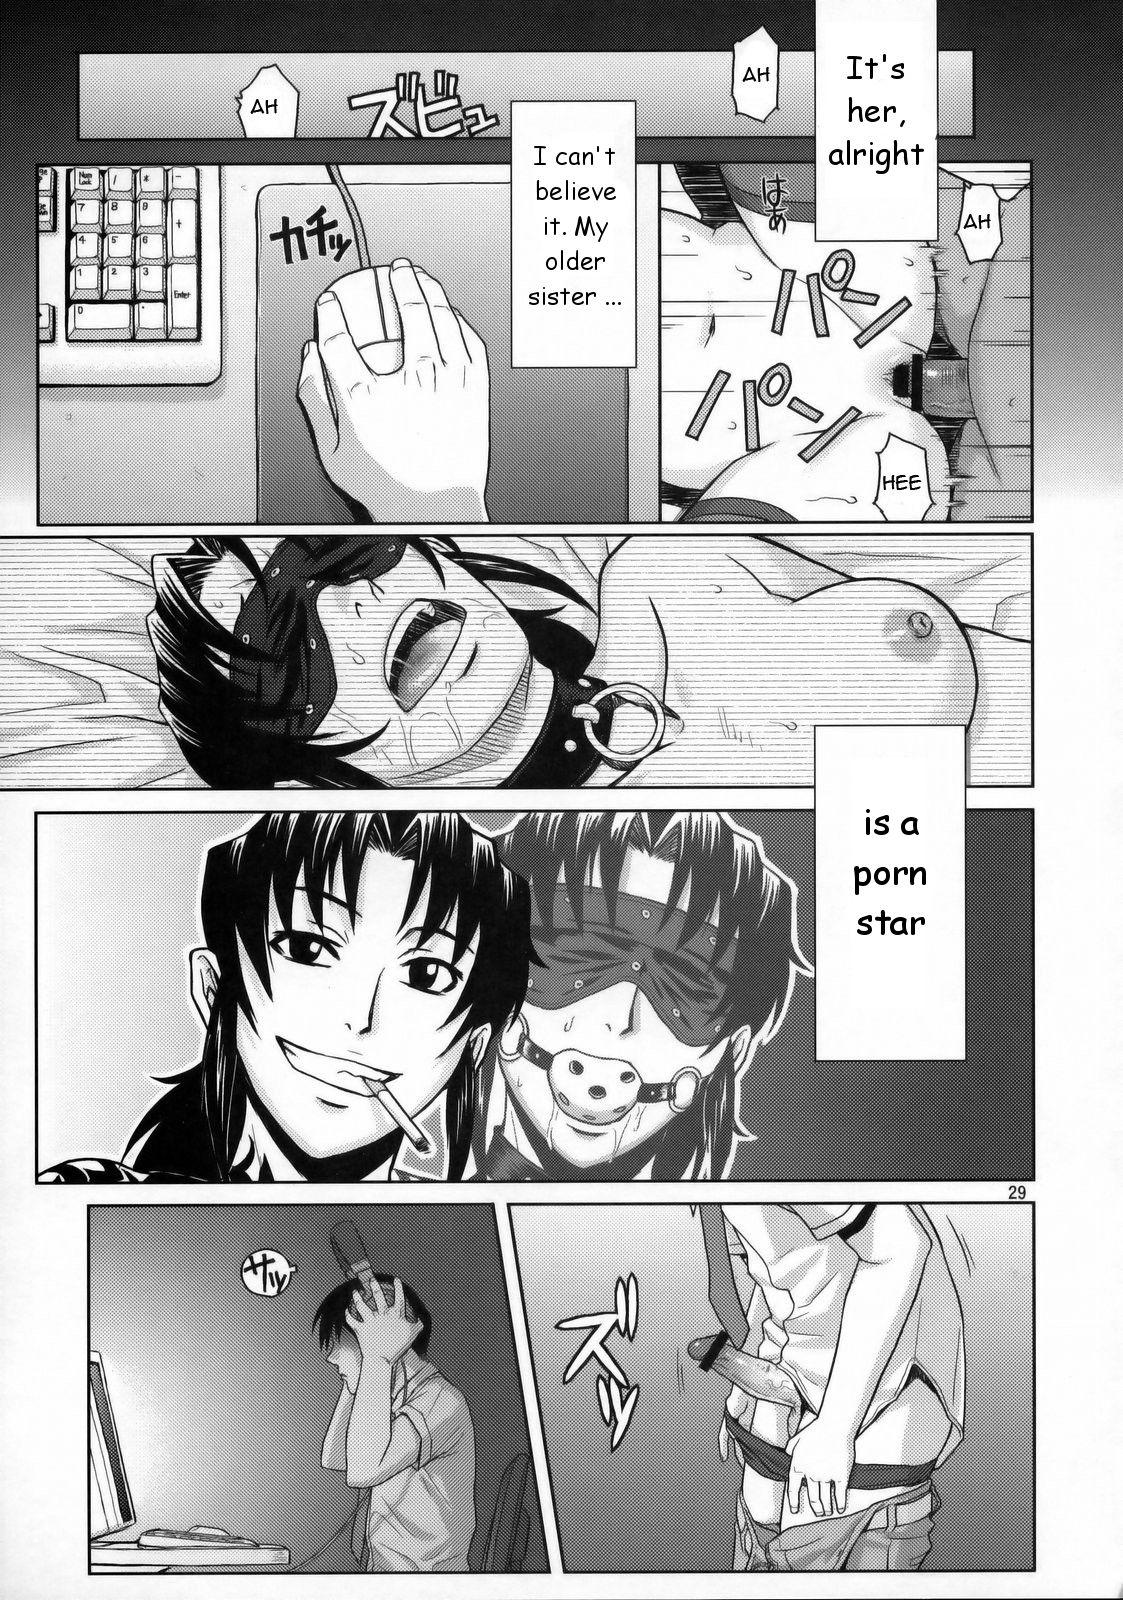 Ride My Sister Is A Pornstar Part 1 - Black lagoon Shaved - Page 4